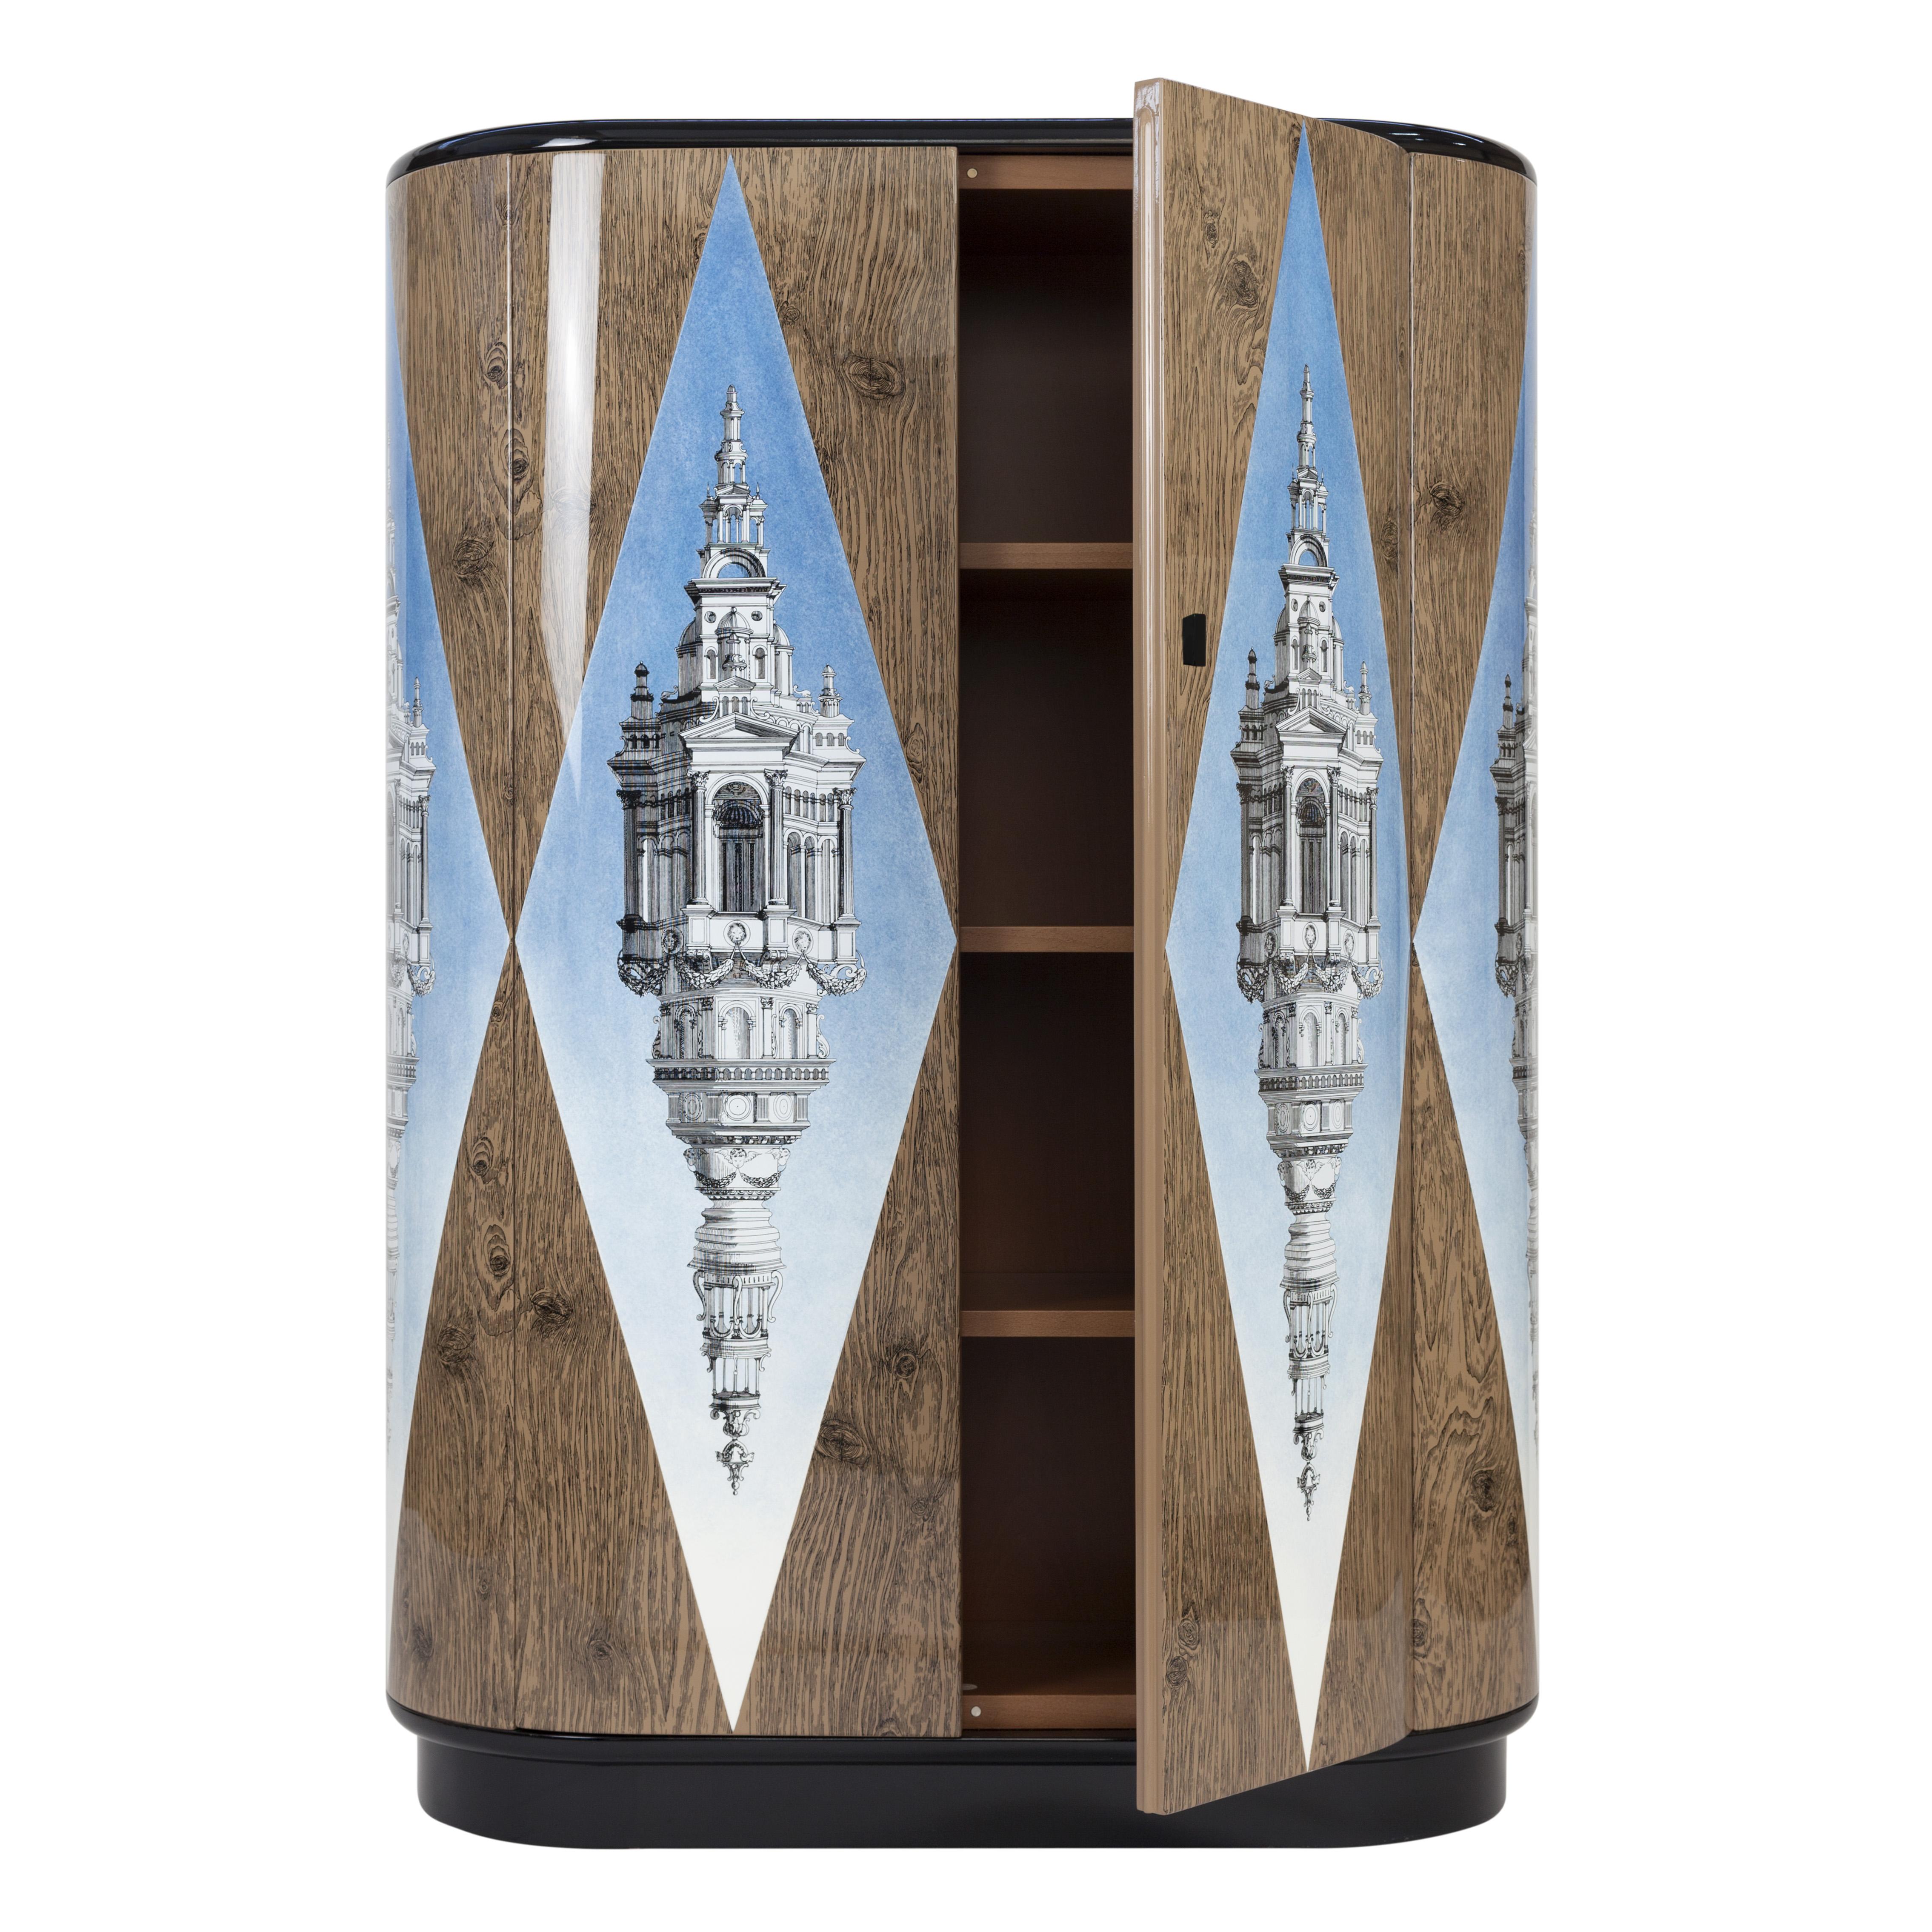 The curved cabinet shape was designed by Barnaba Fornasetti in 2003 and now it can be considered one of the most iconic pieces of furniture in the Italian atelier's collection. 

Like all Fornasetti pieces of furniture, it is hand-crafted using